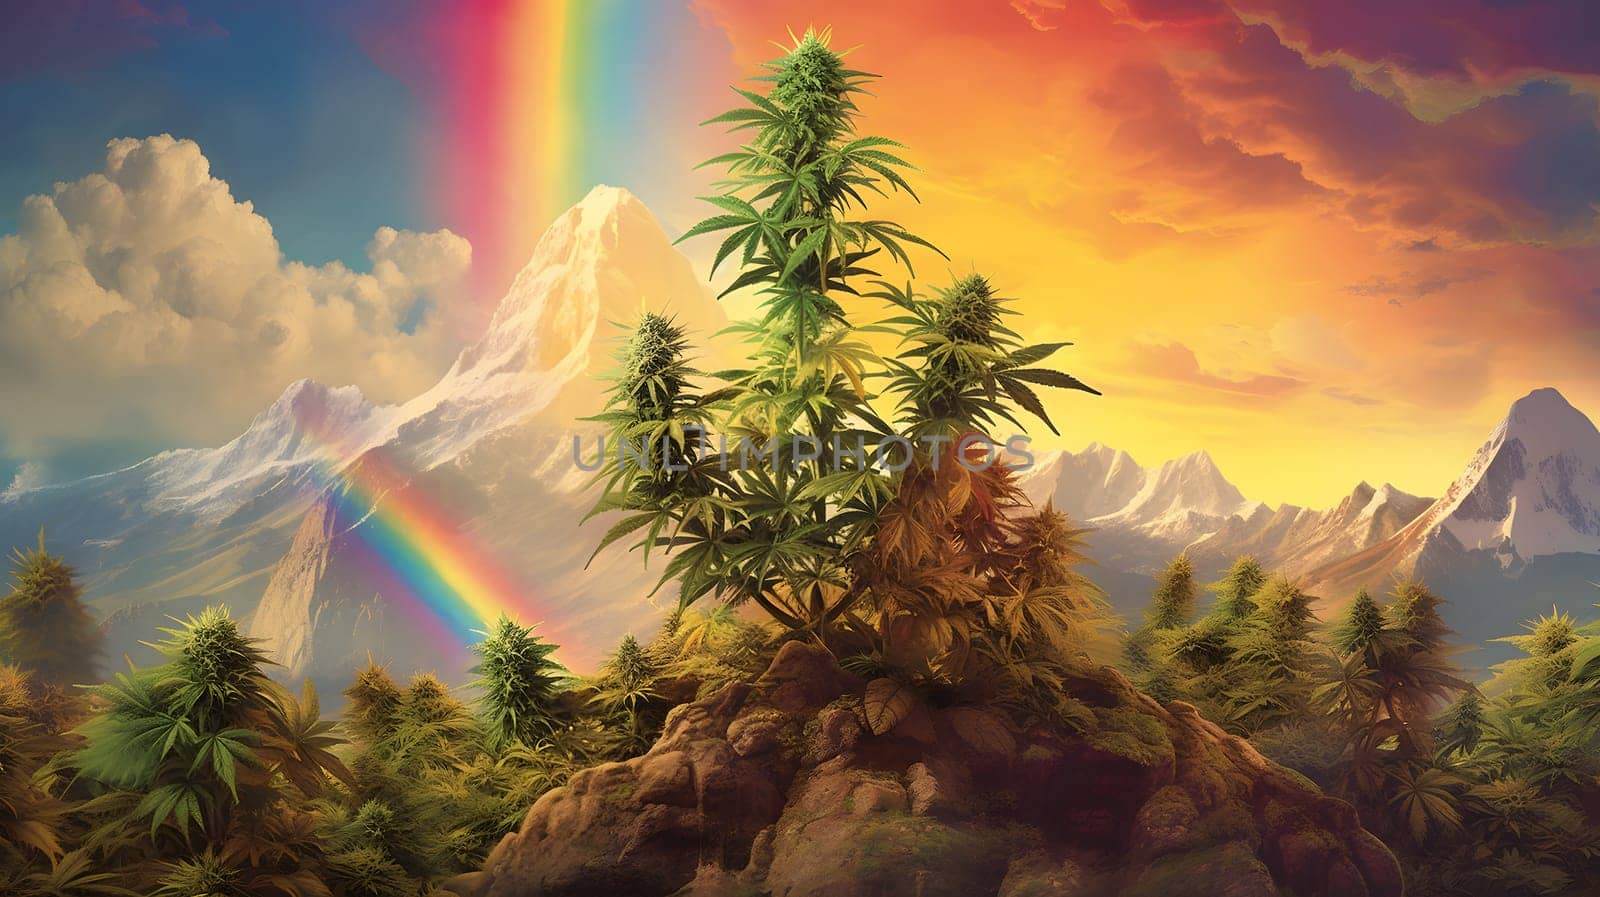 a marijuana plants with a rainbow in the sky behind it. Neural network generated in May 2023. Not based on any actual person, scene or pattern.